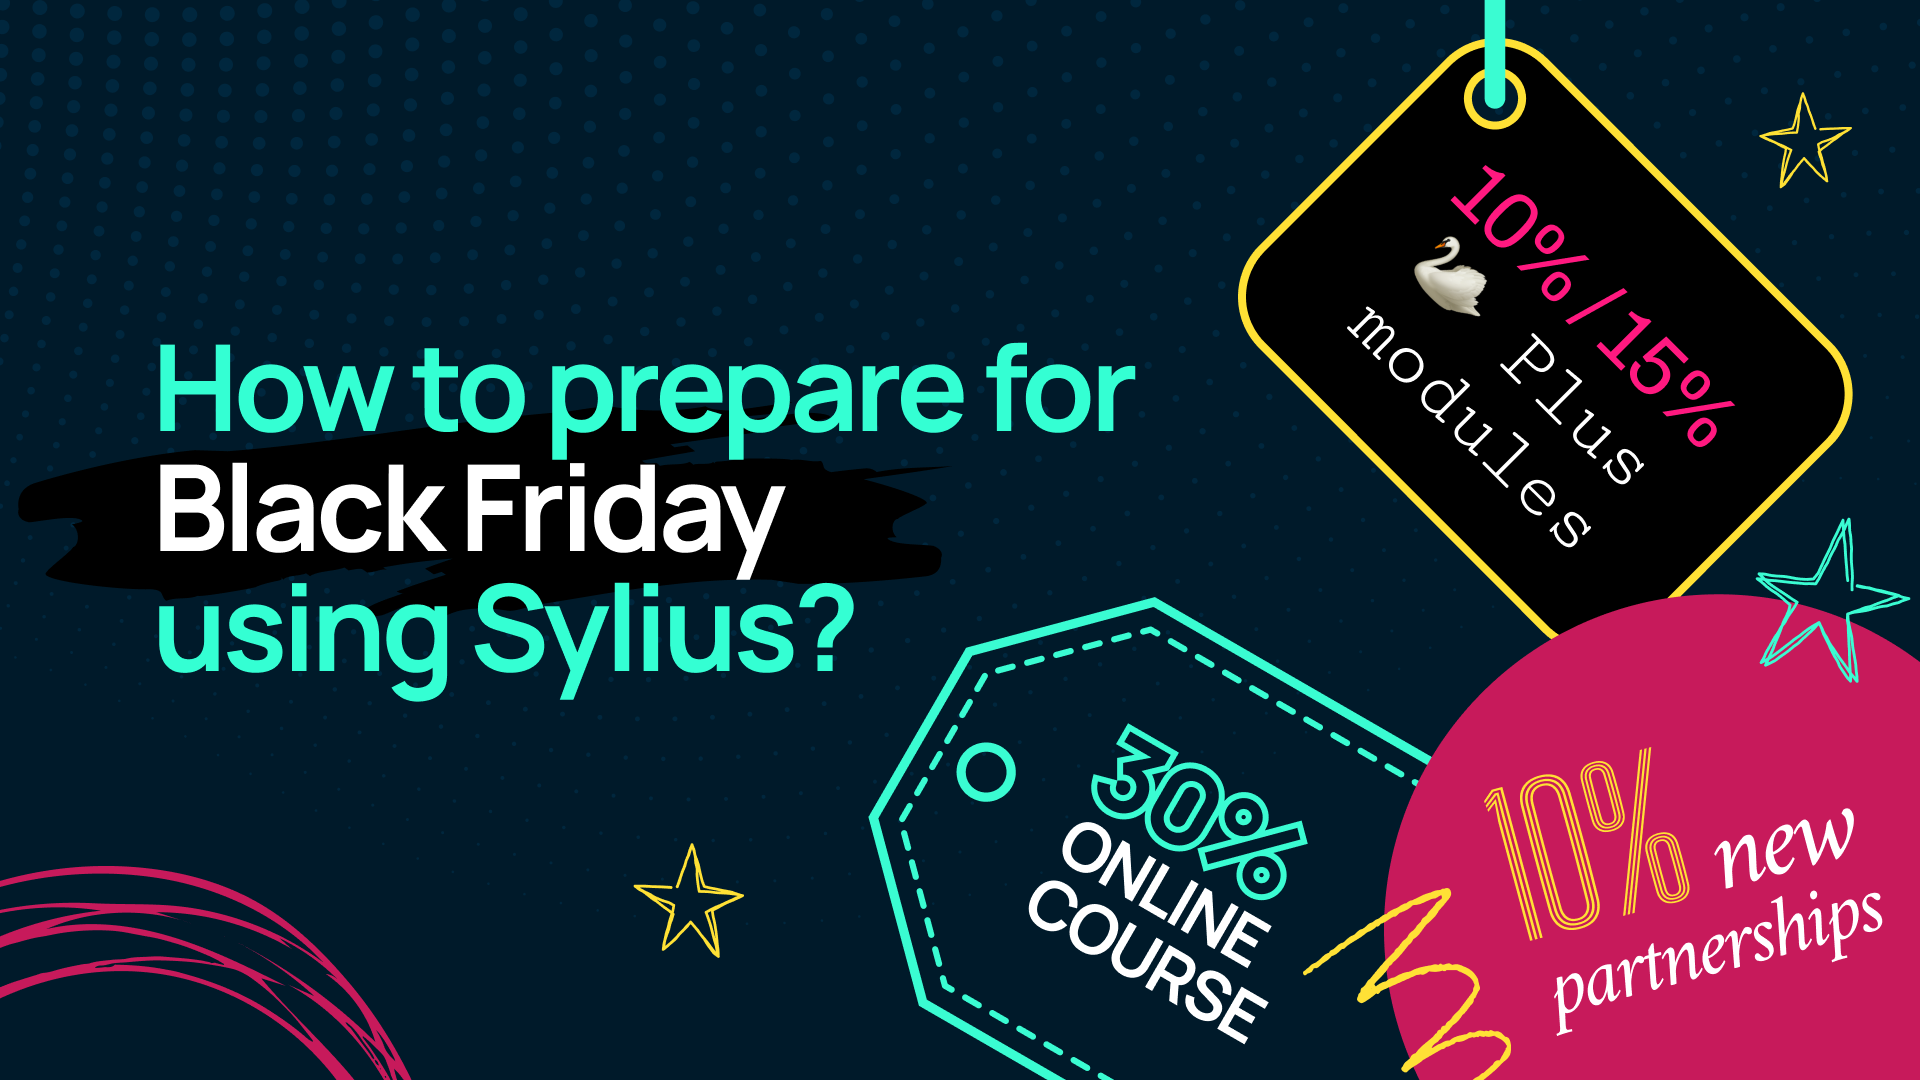 How to prepare for Black Friday using Sylius?